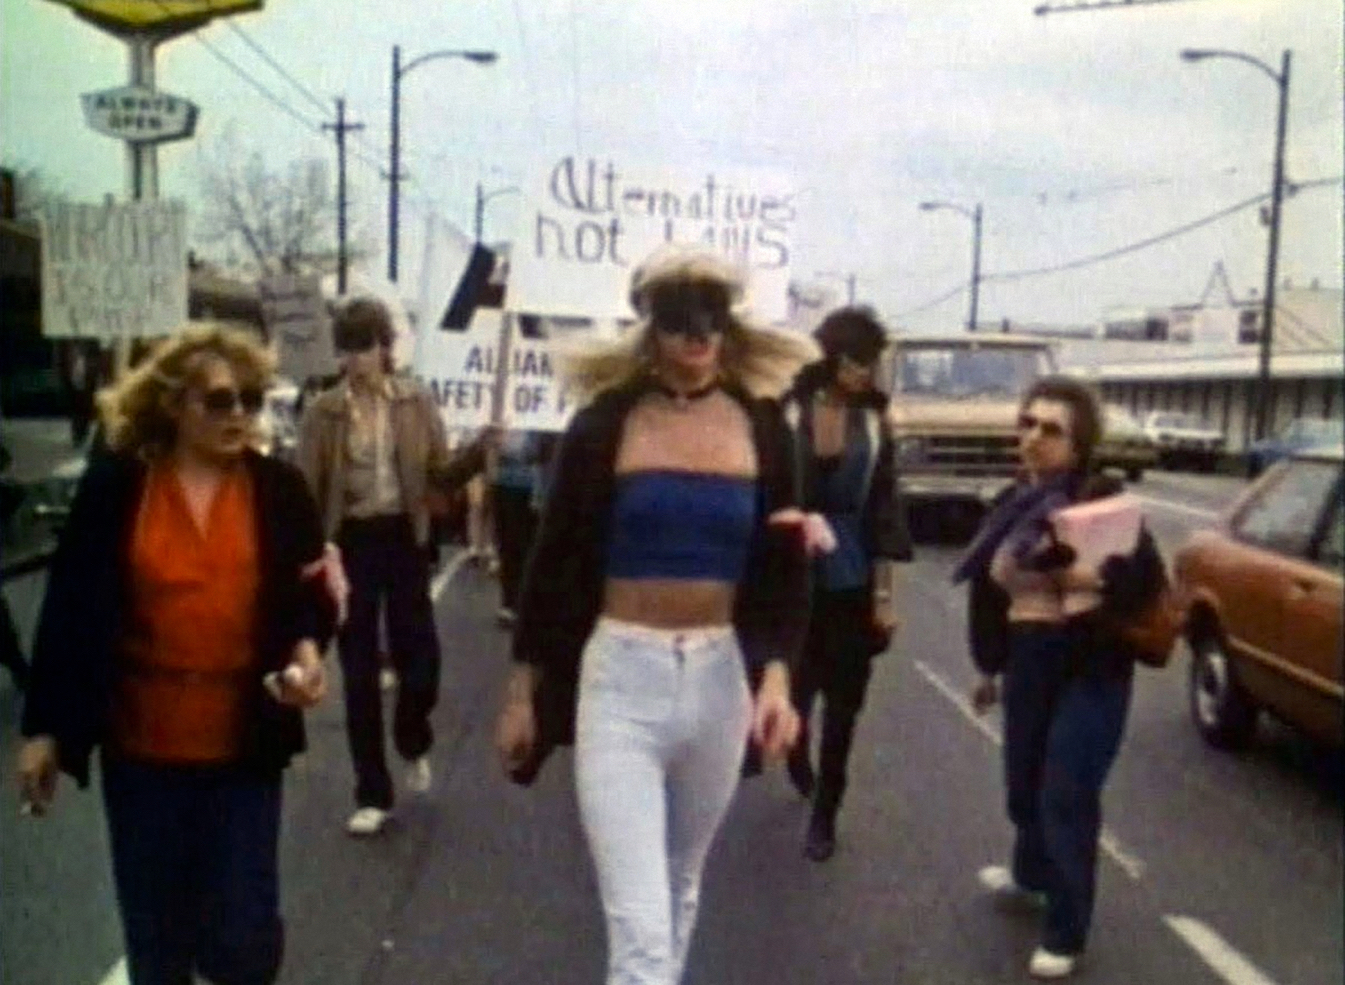 Alliance for the Safety of Prostitutes on Broadway, April 20, 1983. Film still from Hookers On Davie, by Janis Cole and Holly Dale.